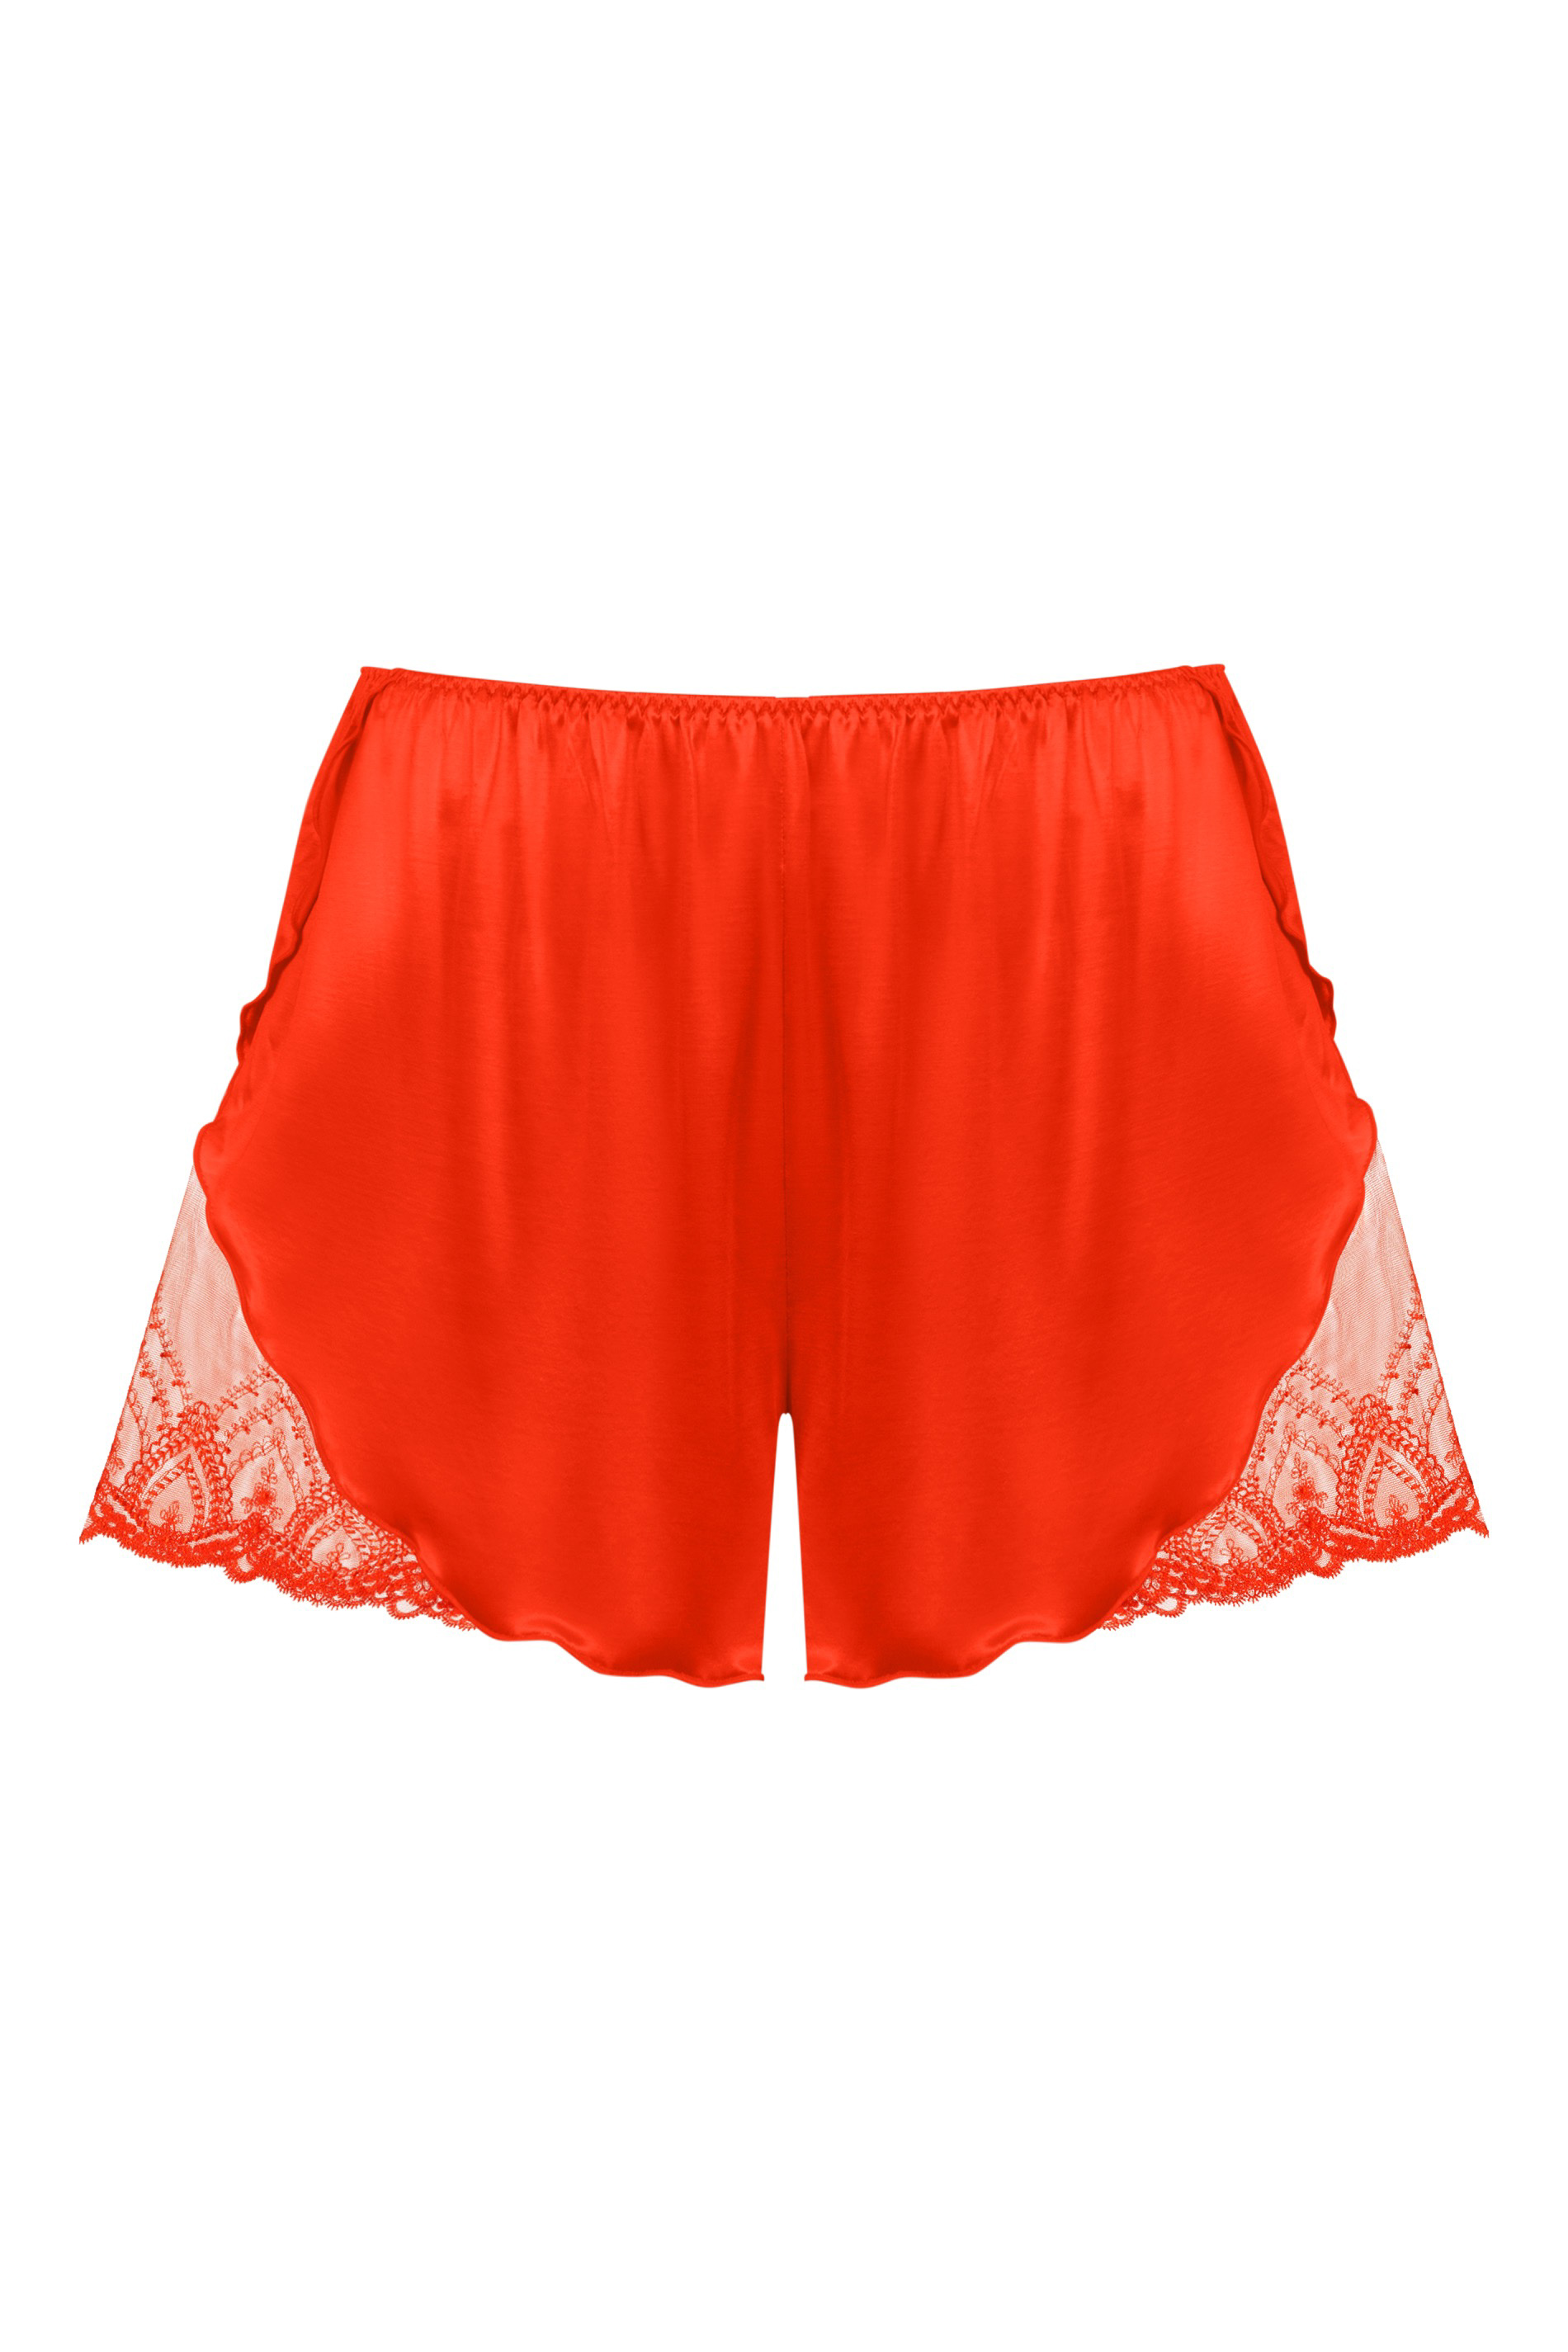 French knickers Serie Cara Uitknippen | mey®